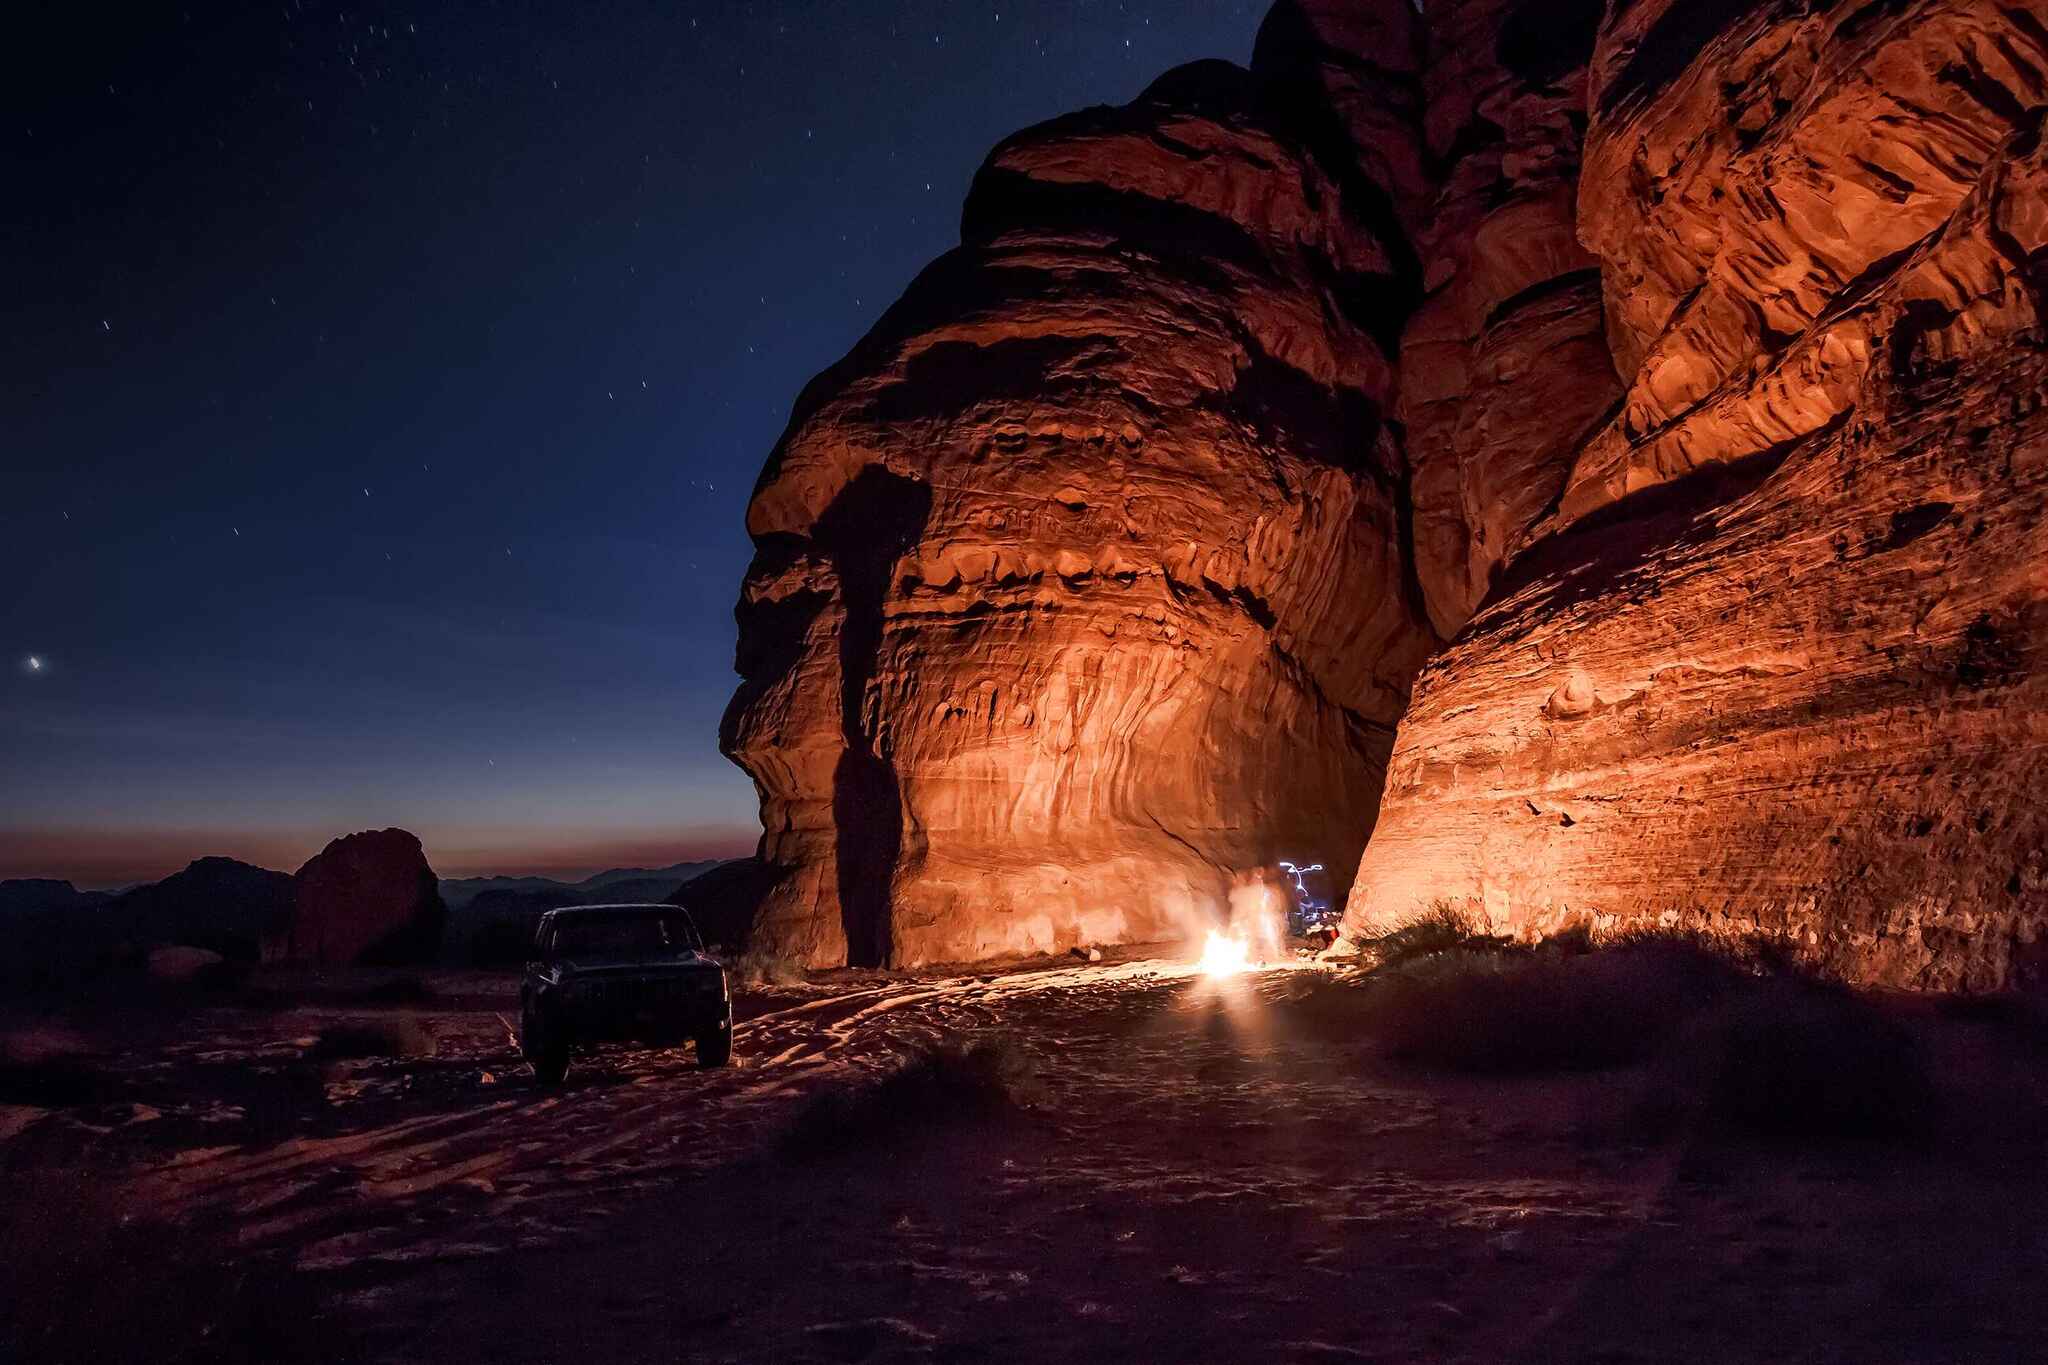 Camping Between the Rocks, Under the Stars